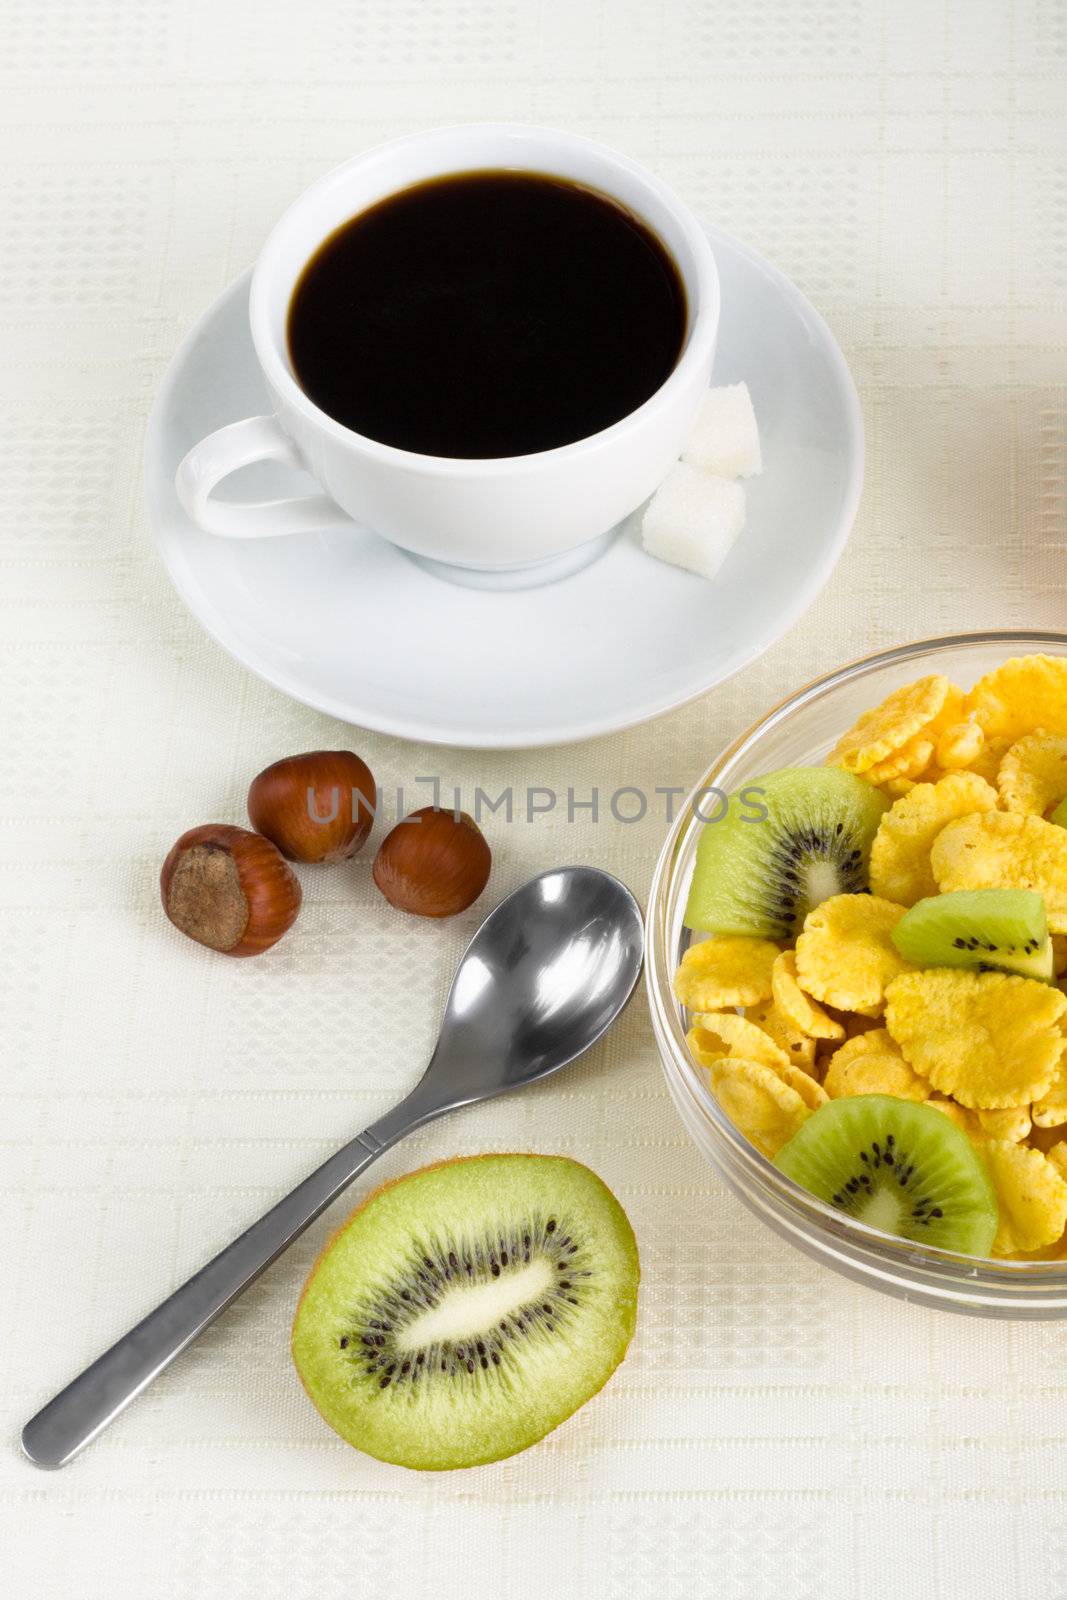 Healthy breakfast - cornflakes with fresh fruit